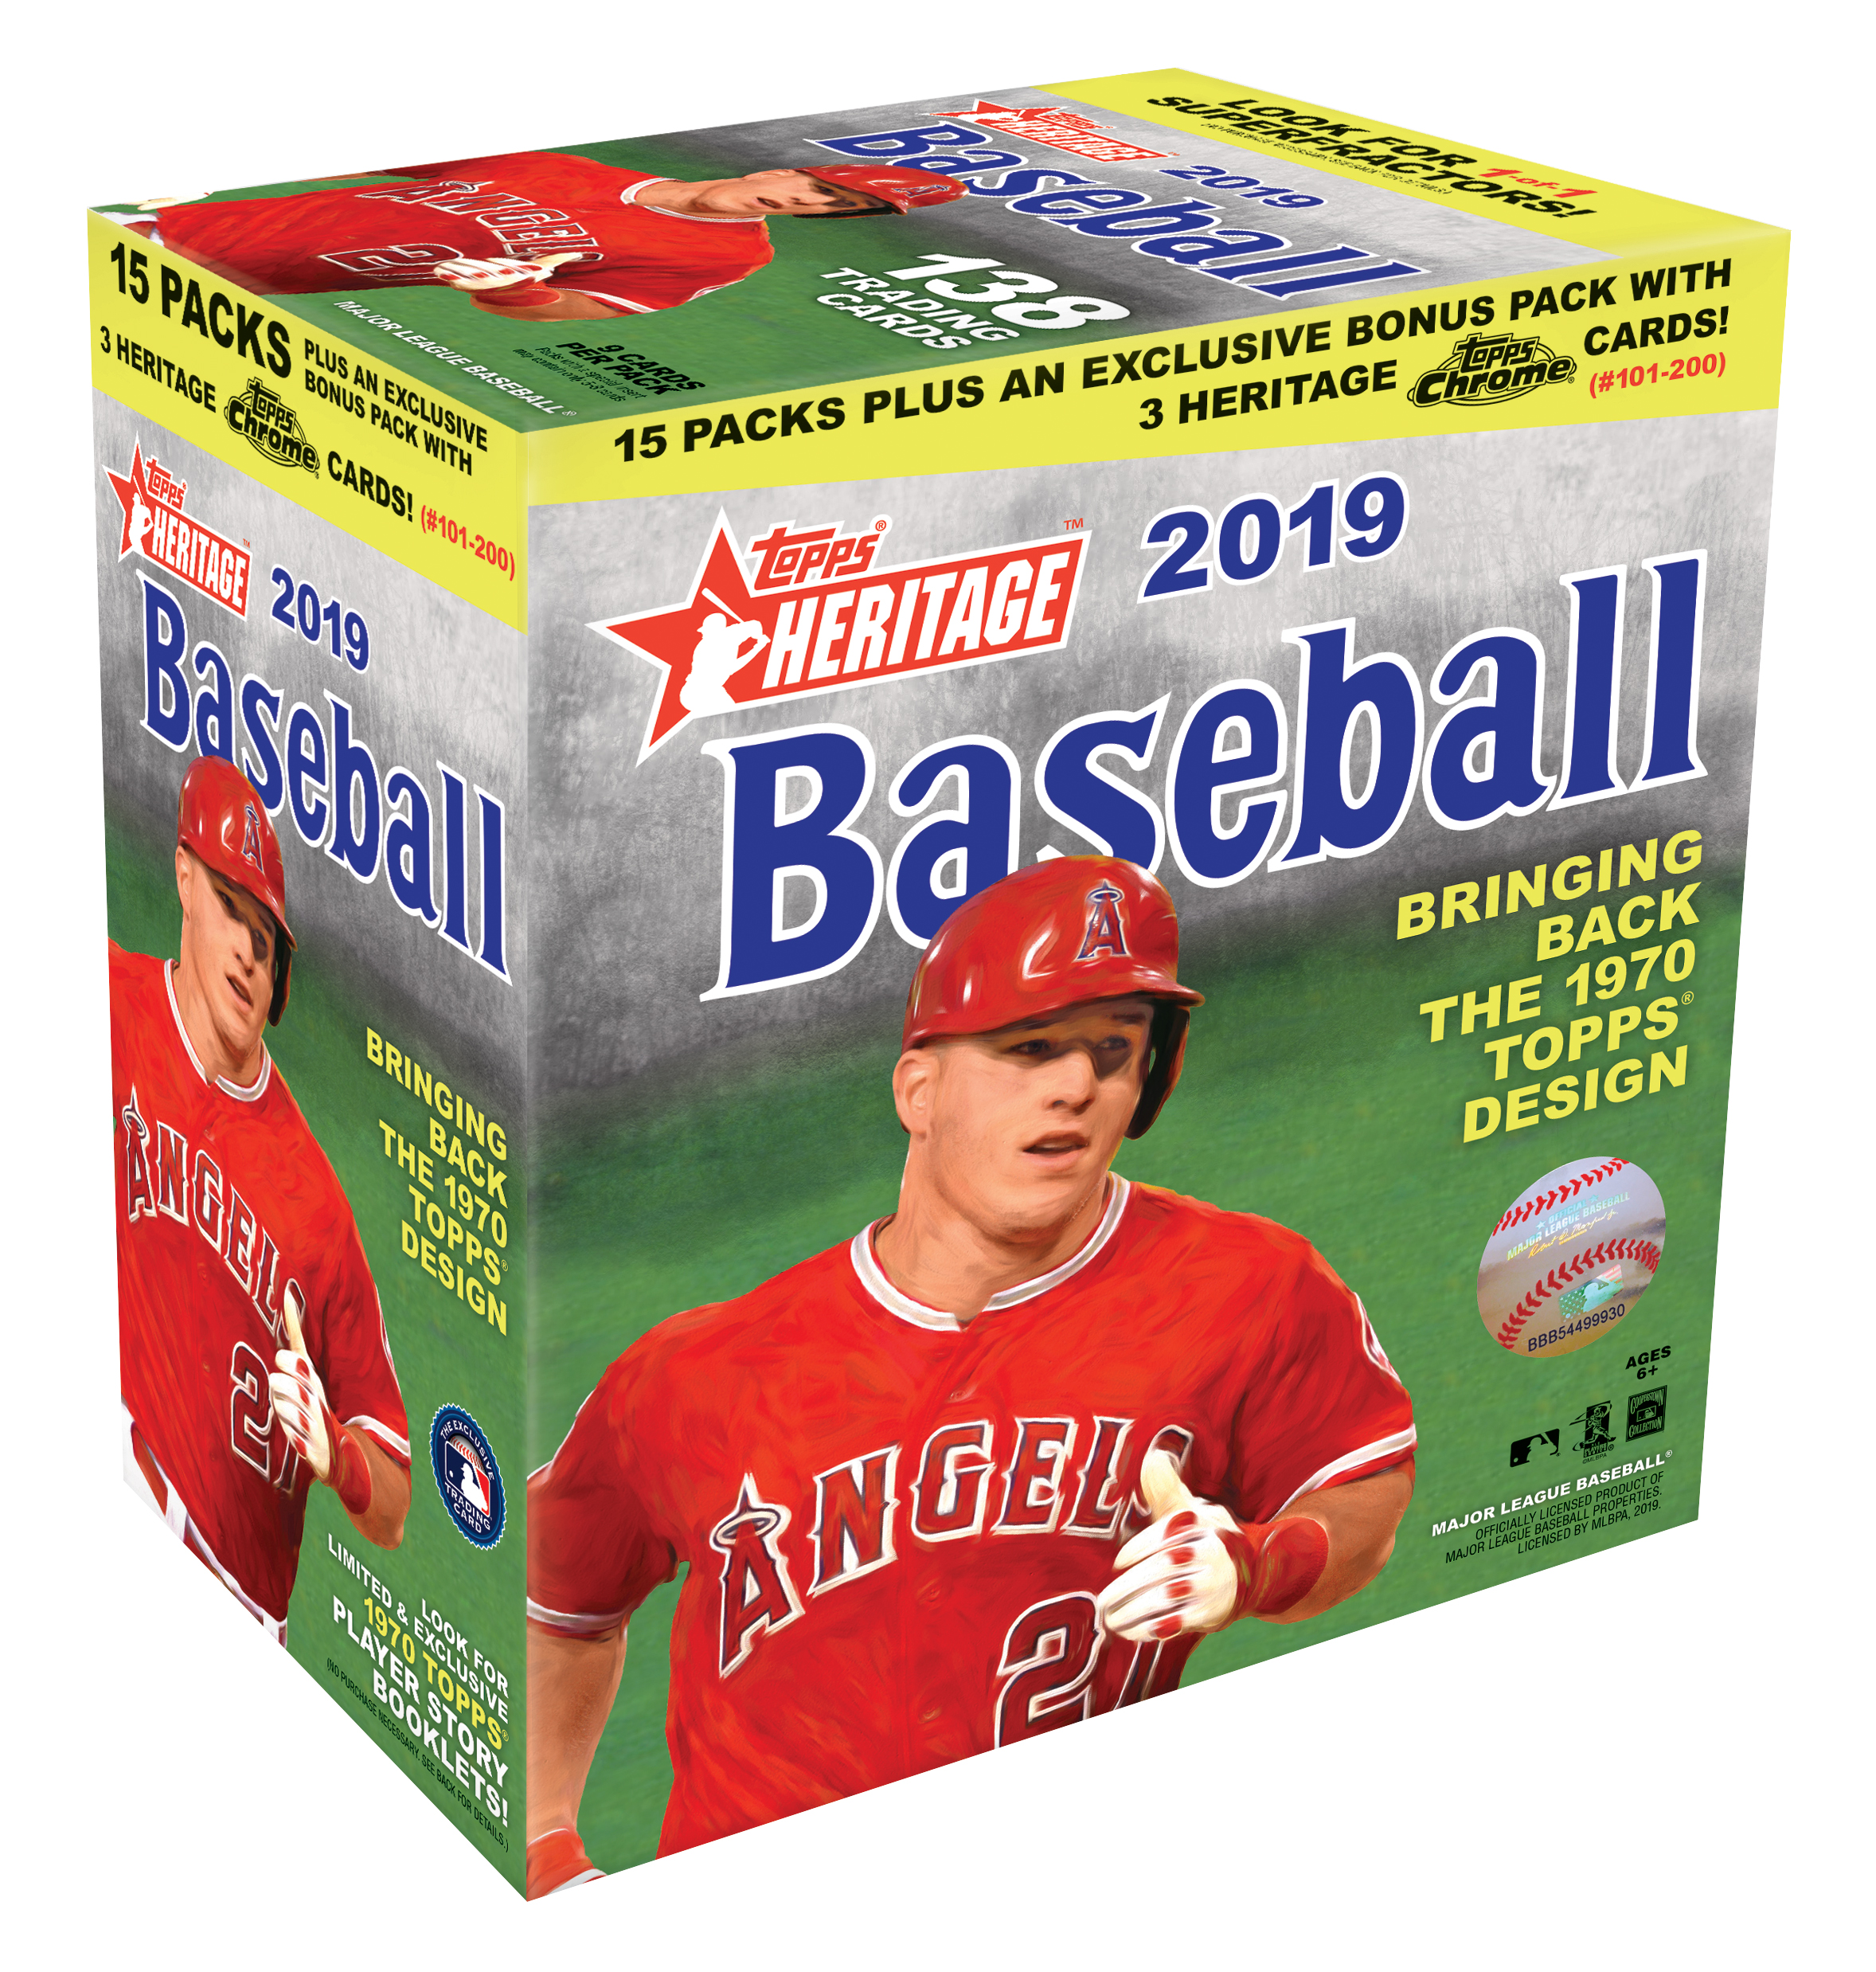 2019 Topps Heritage Mega Box- MLB Baseball Trading Cards- Find Autographs, Rookies | Exclusive Chrome Parallel Pack Included - image 1 of 3